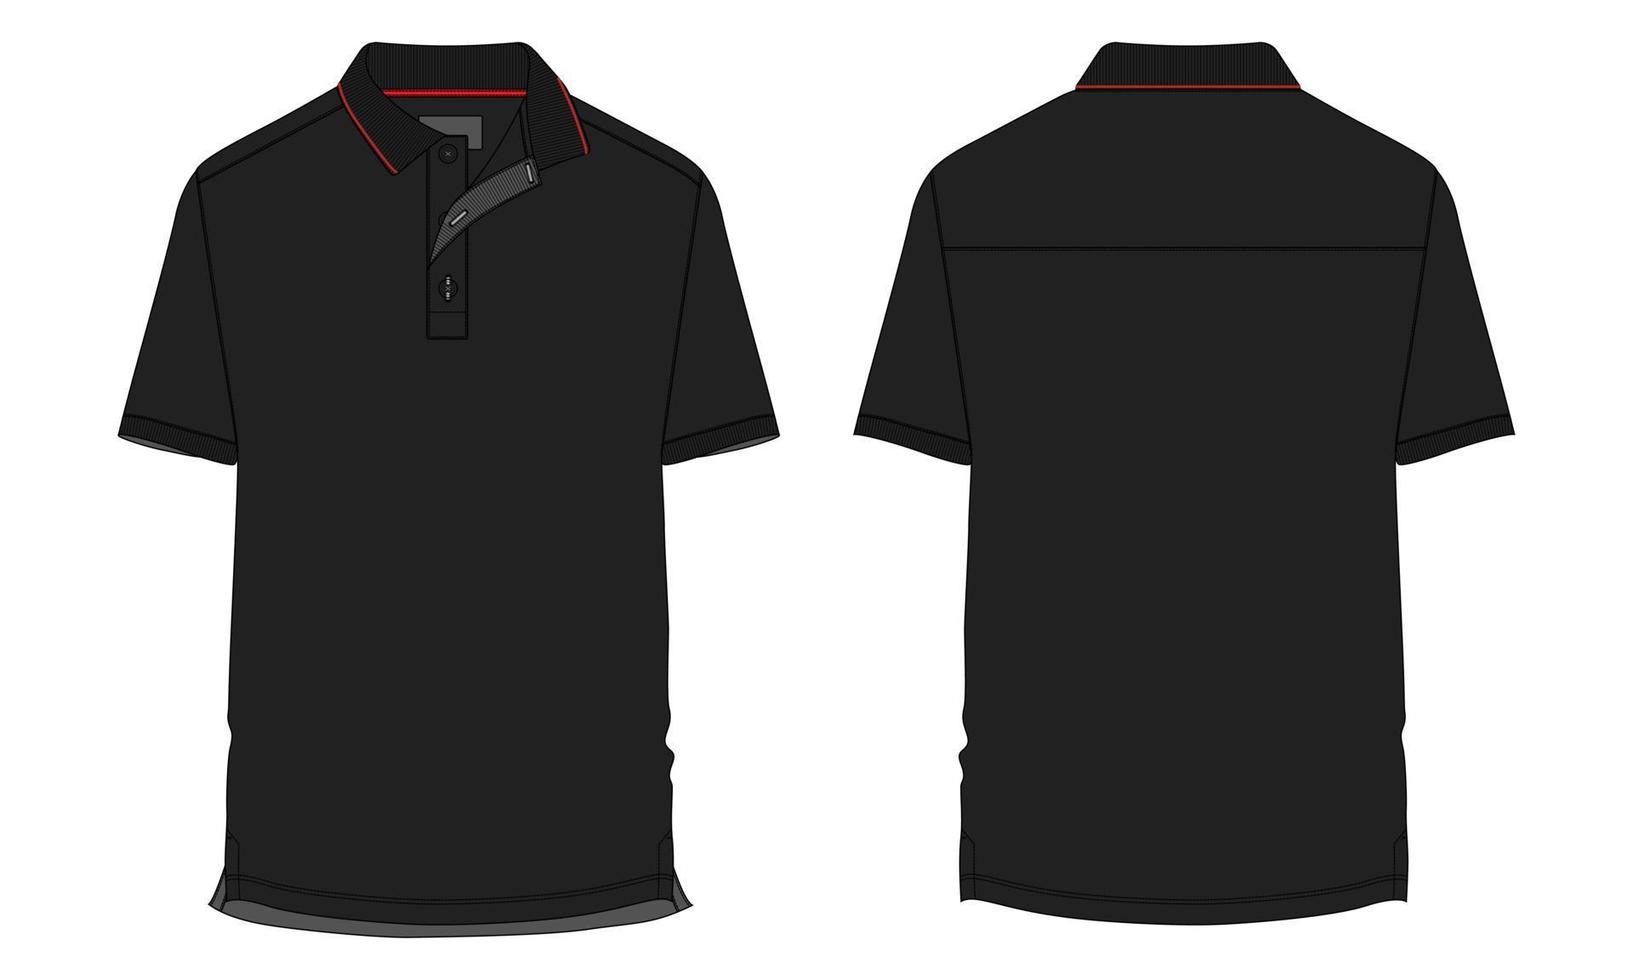 Short sleeve Polo shirt Technical Fashion flat sketch vector illustration black color template front and back views. Clothing design mock up for men's isolated on White background